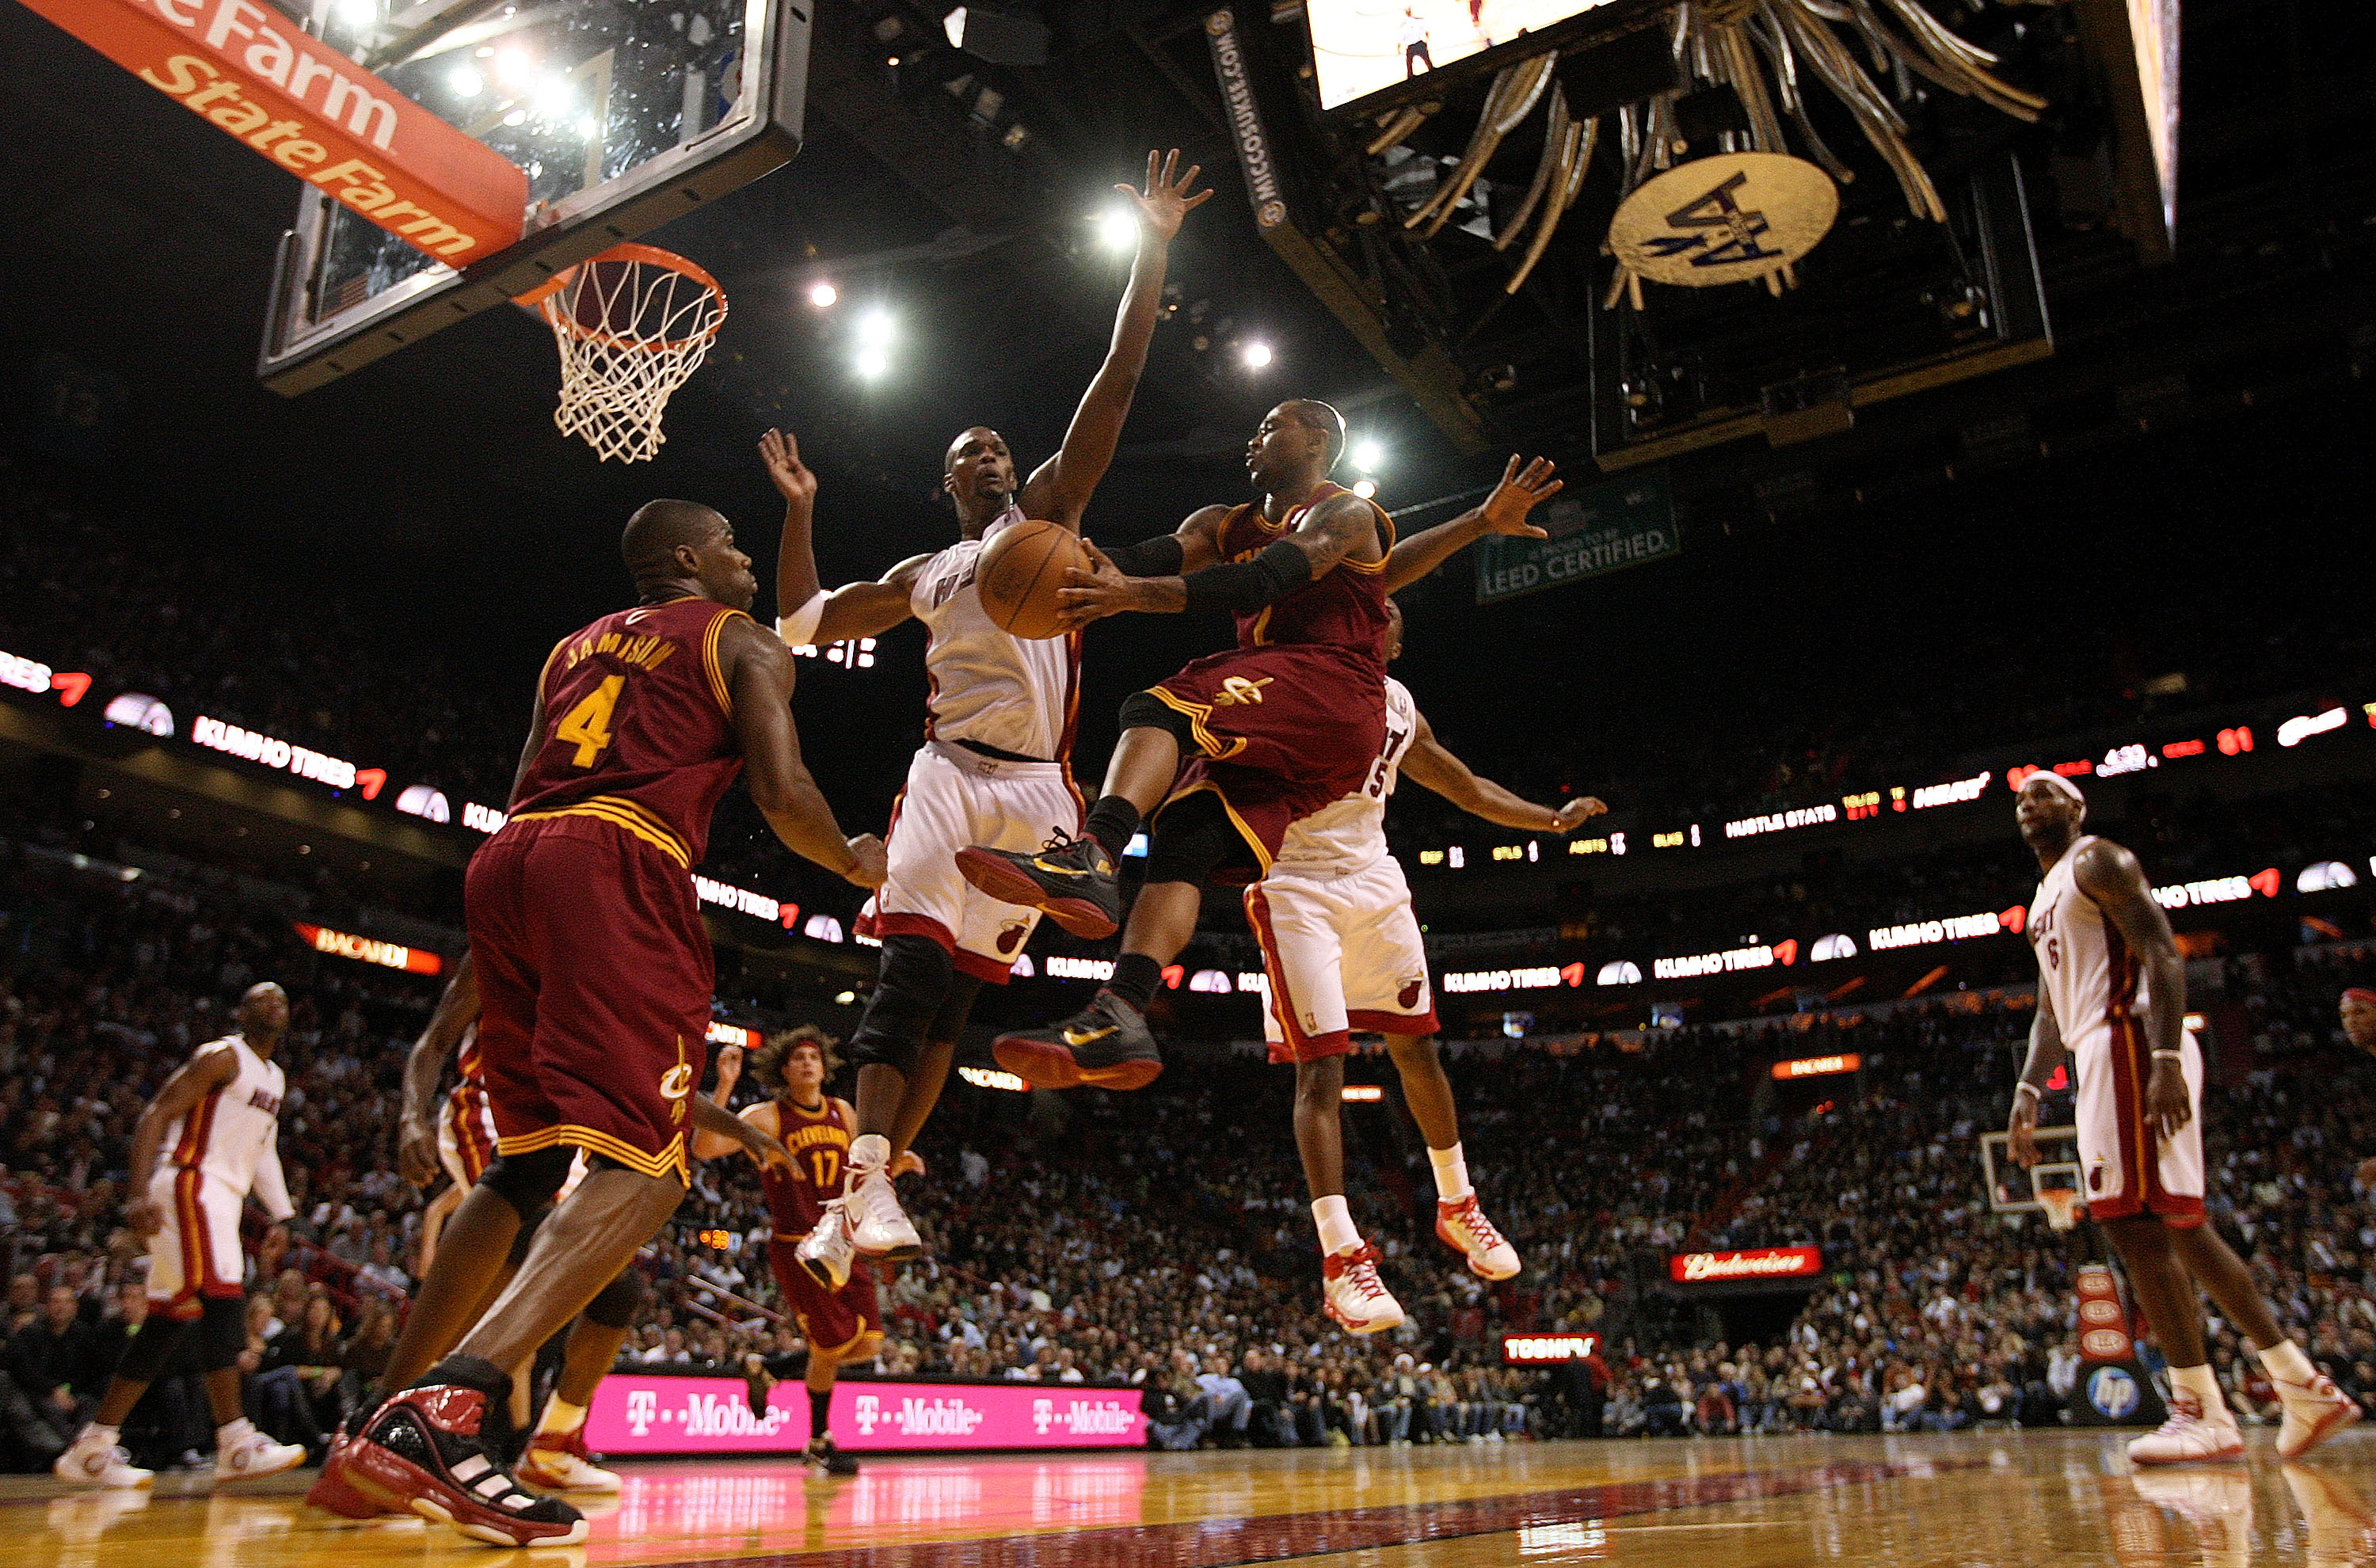 MIAMI, FL - DECEMBER 15:  Mo Wlliams #2 of the Cleveland Cavaliers passes around Chris Bosh #1 of the Miami Heat during a game  at American Airlines Arena on December 15, 2010 in Miami, Florida. NOTE TO USER: User expressly acknowledges and agrees that, b